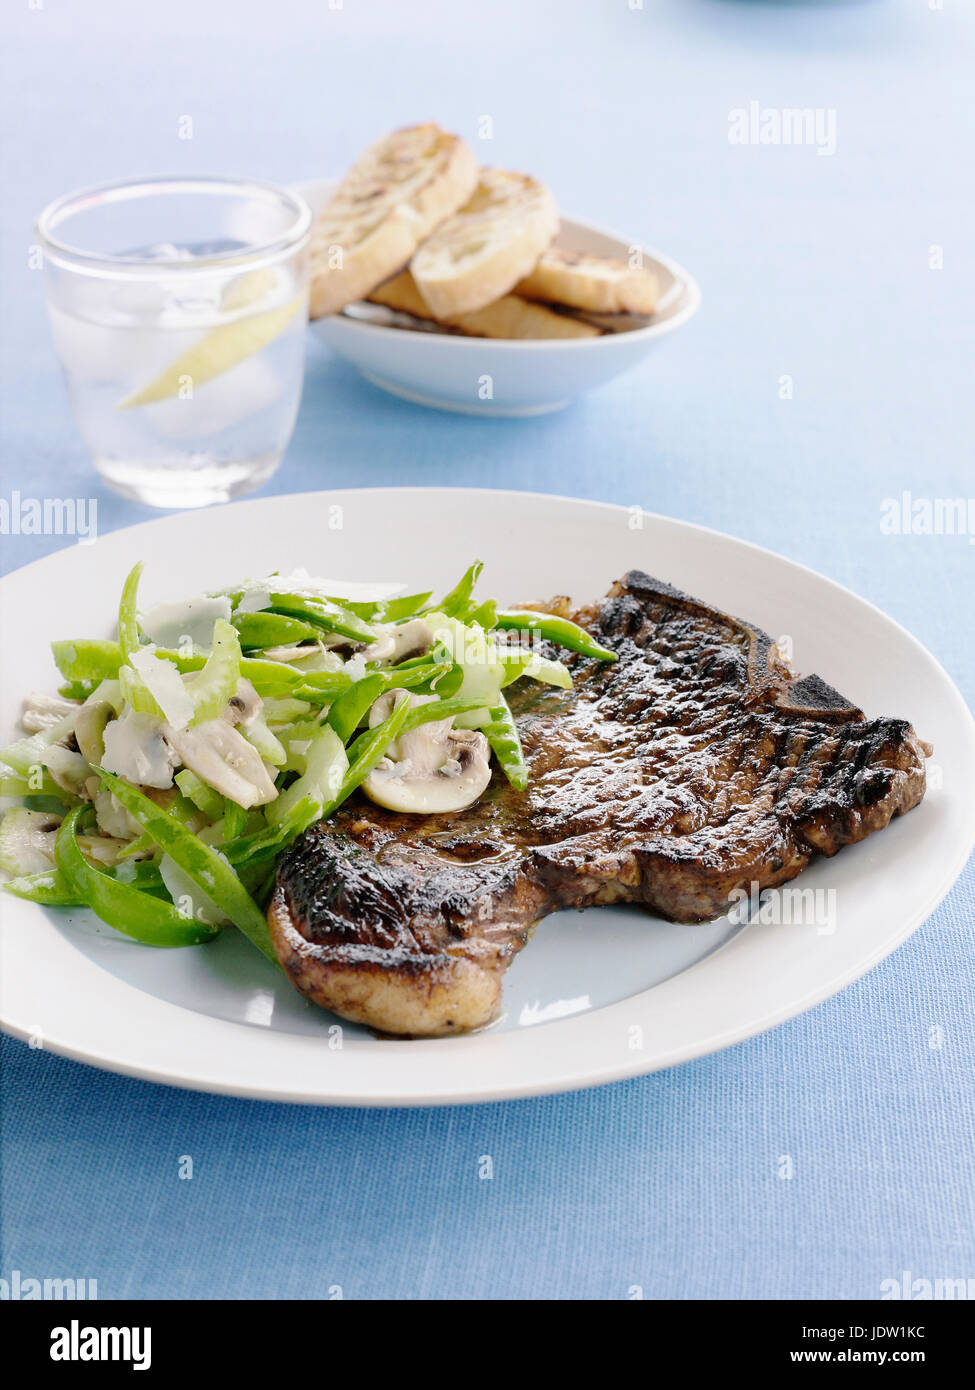 Plate of grilled meat with salad Stock Photo